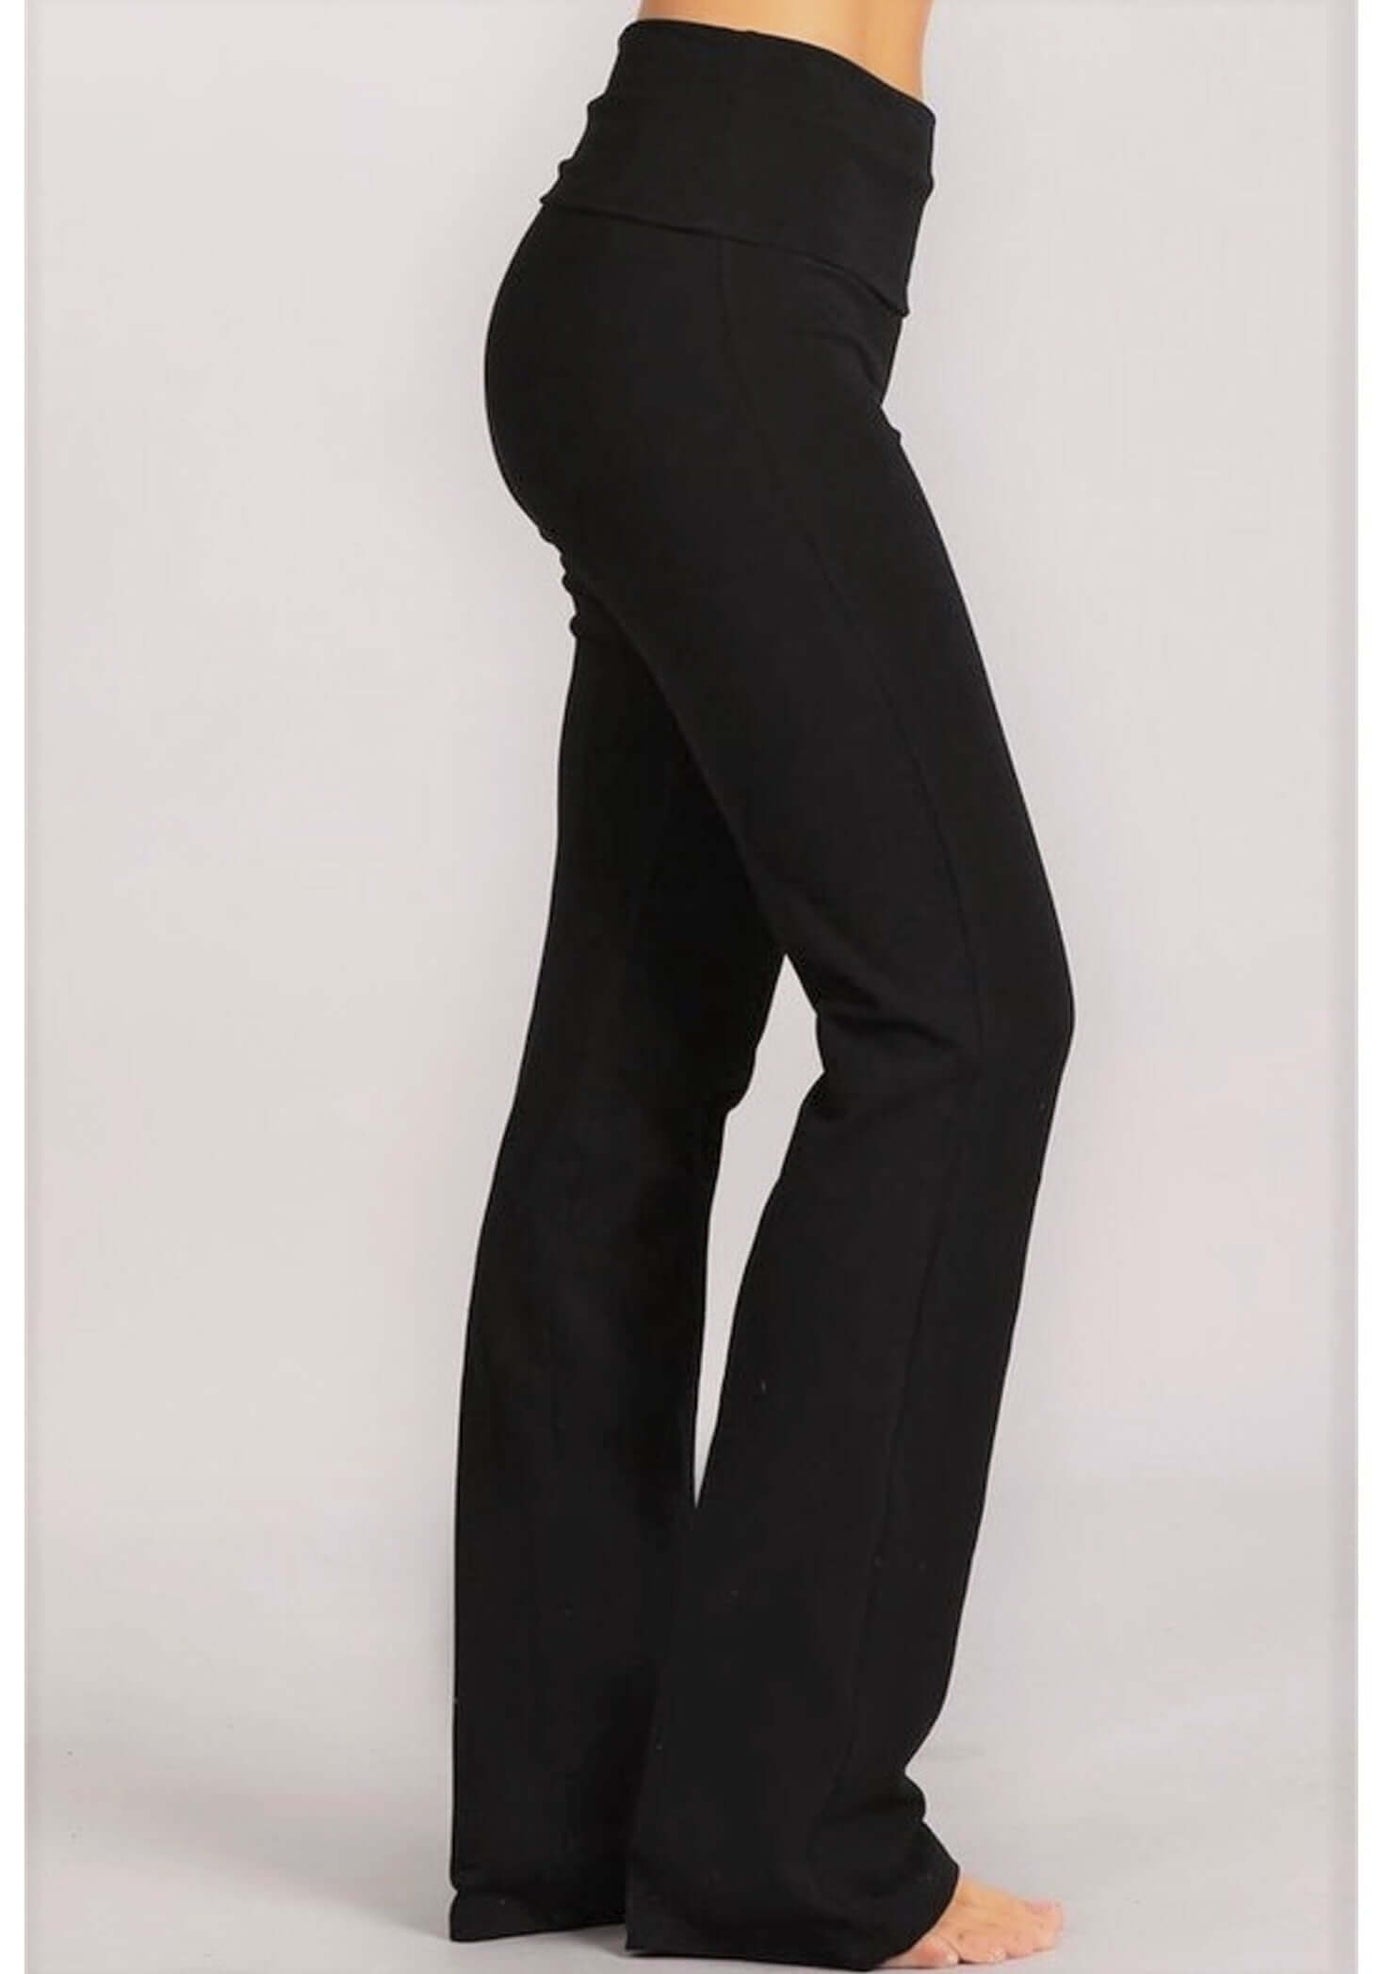 USA Made Soft and Durable Style Black Bootcut Yoga Lounge Pants.  Made in the USA and sold by Classy Cozy Cool Women’s Clothing Boutique